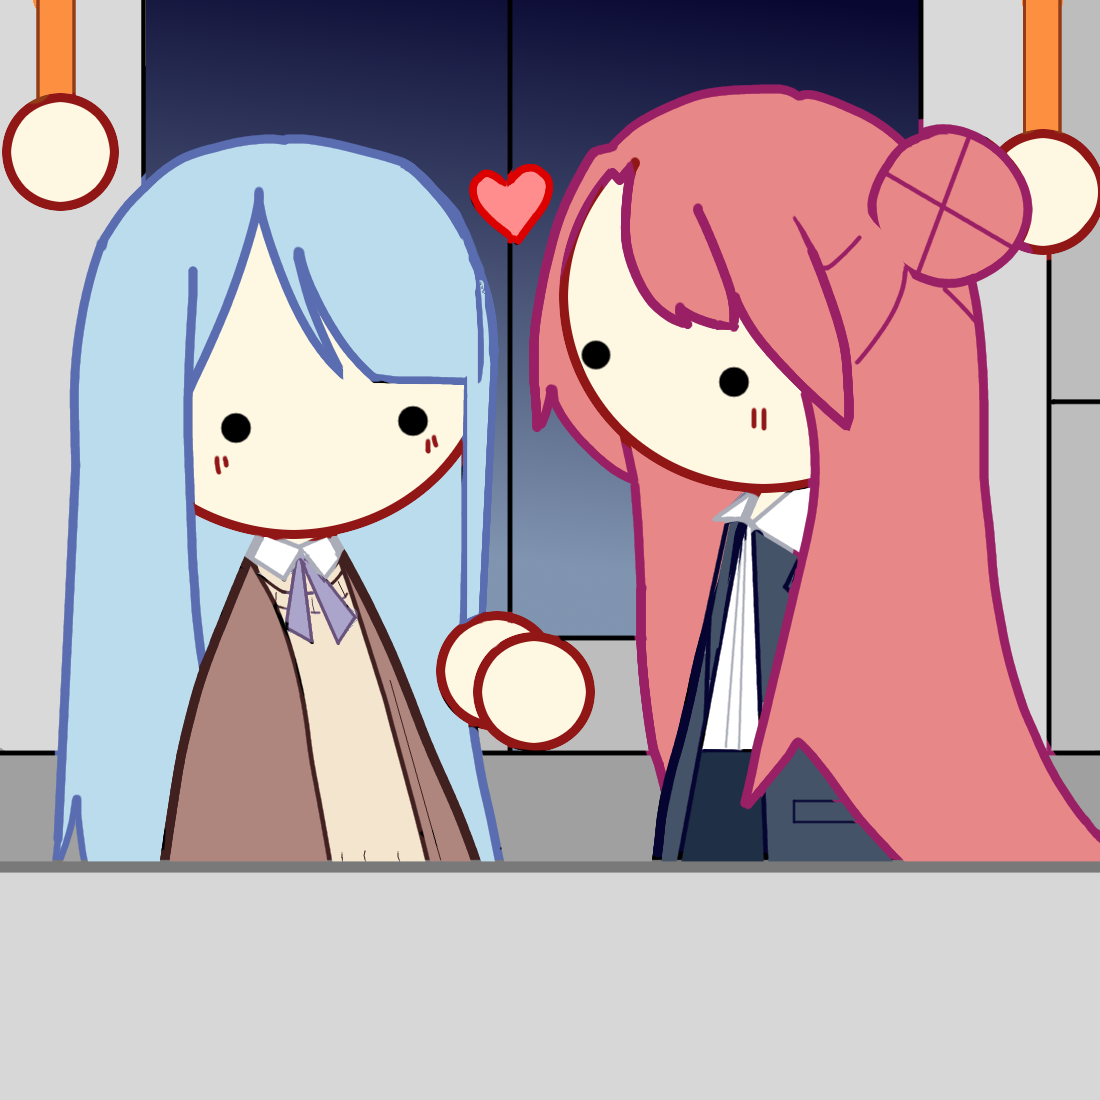 Blue and Pink holding hands